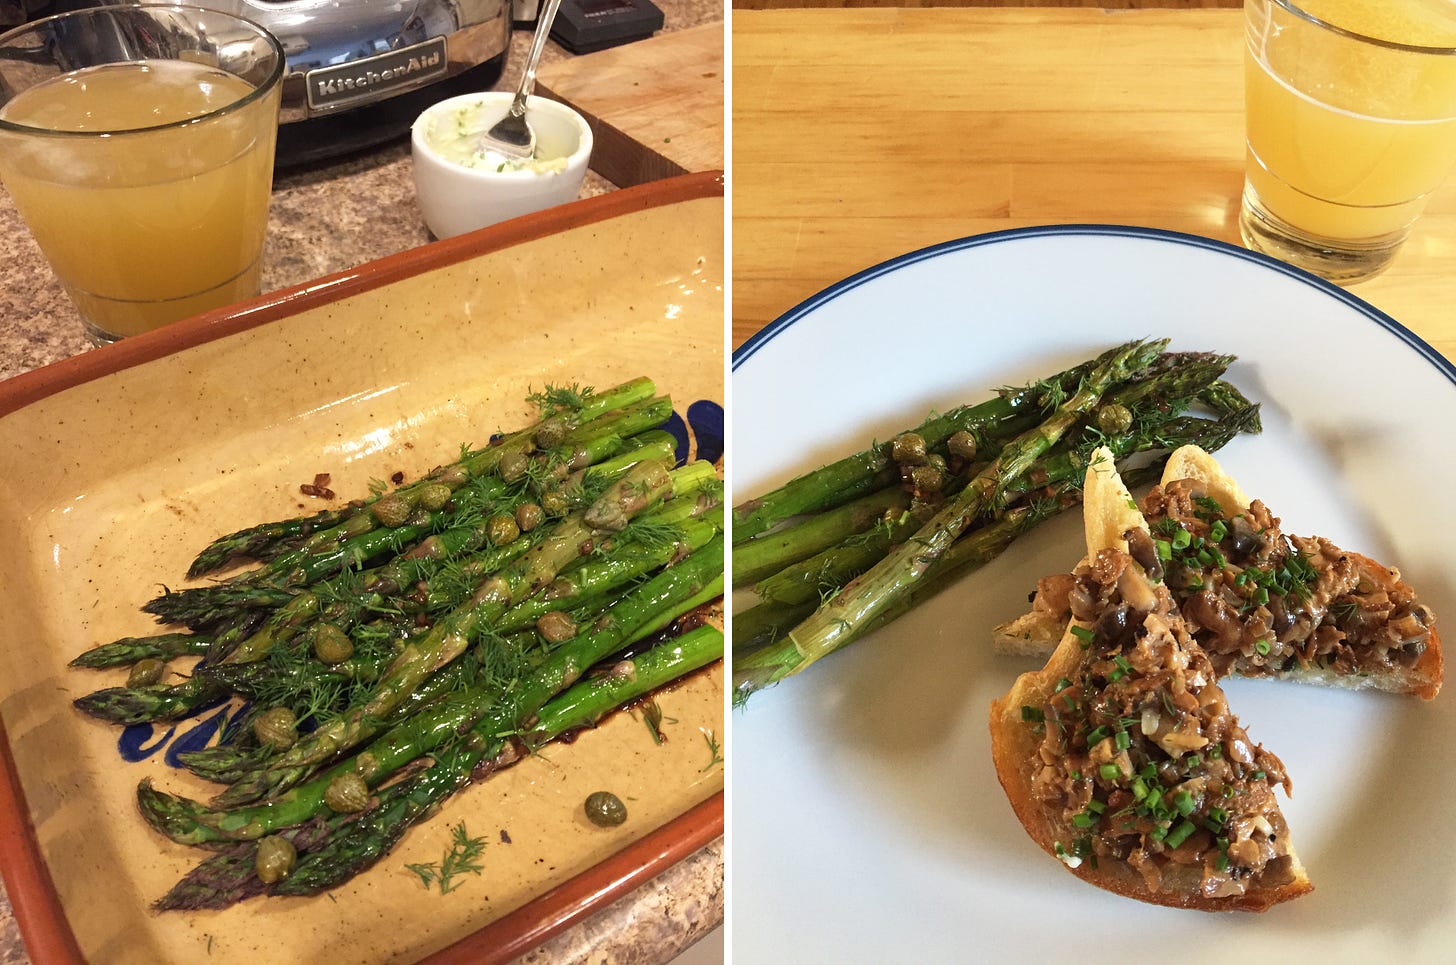 left: a serving dish of asparagus, with dill and capers arranged on top. A glass of beer and a dish of butter with chives in it are visible in the background. right image: a plate with chopped mushrooms and chives on toast arranged in front of a serving of asparagus. A glass of beer sits to the side of the plate.